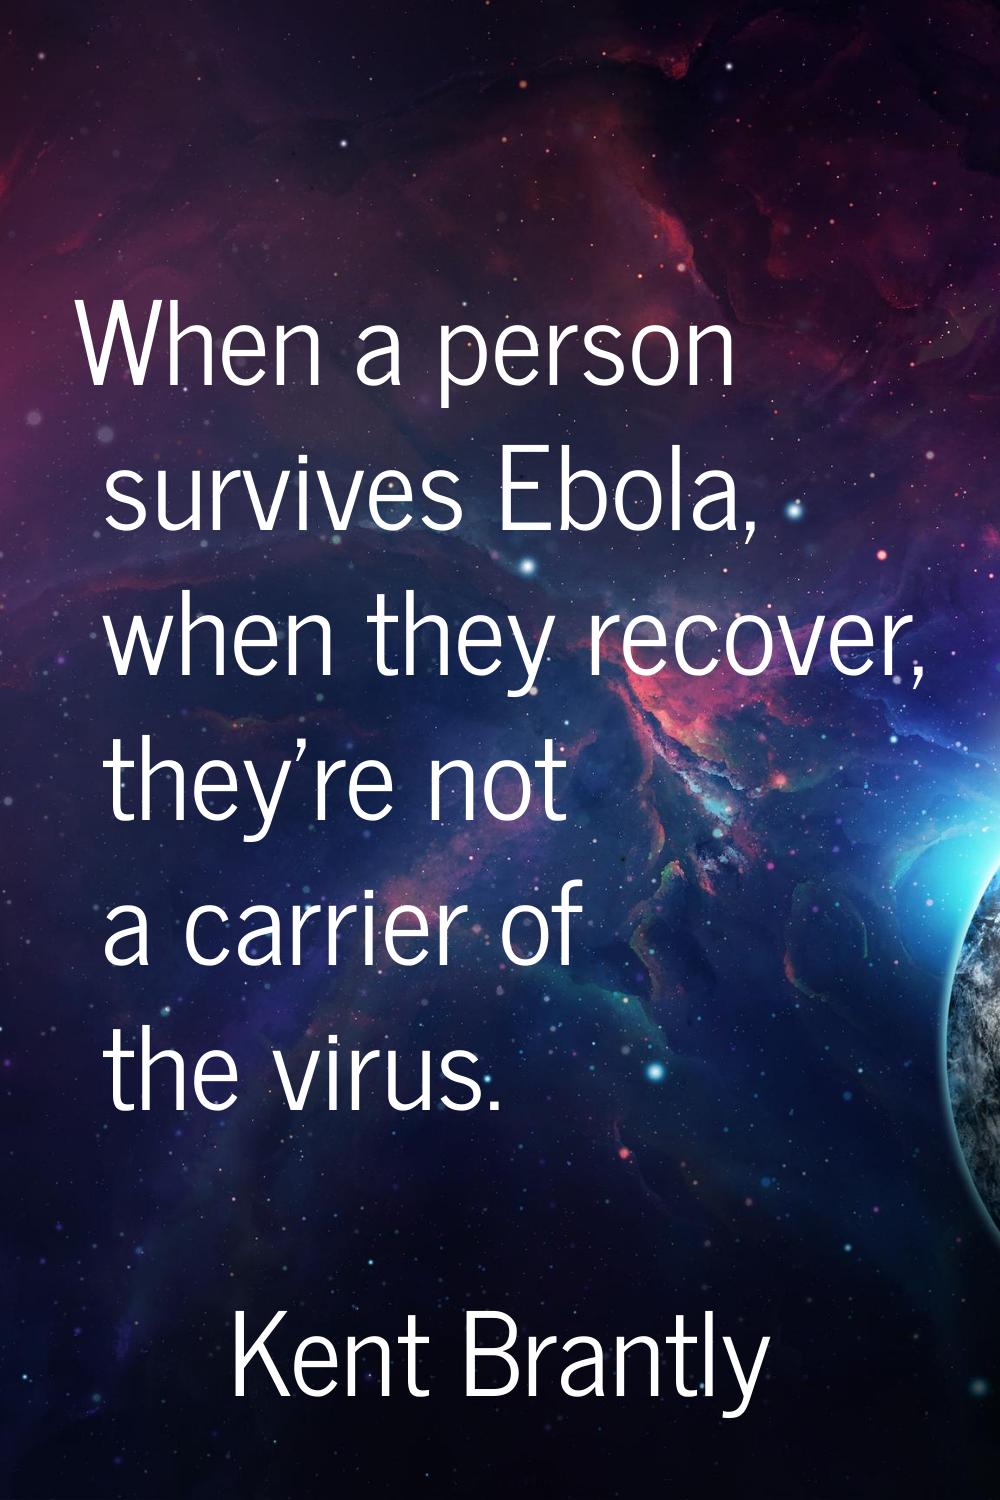 When a person survives Ebola, when they recover, they're not a carrier of the virus.